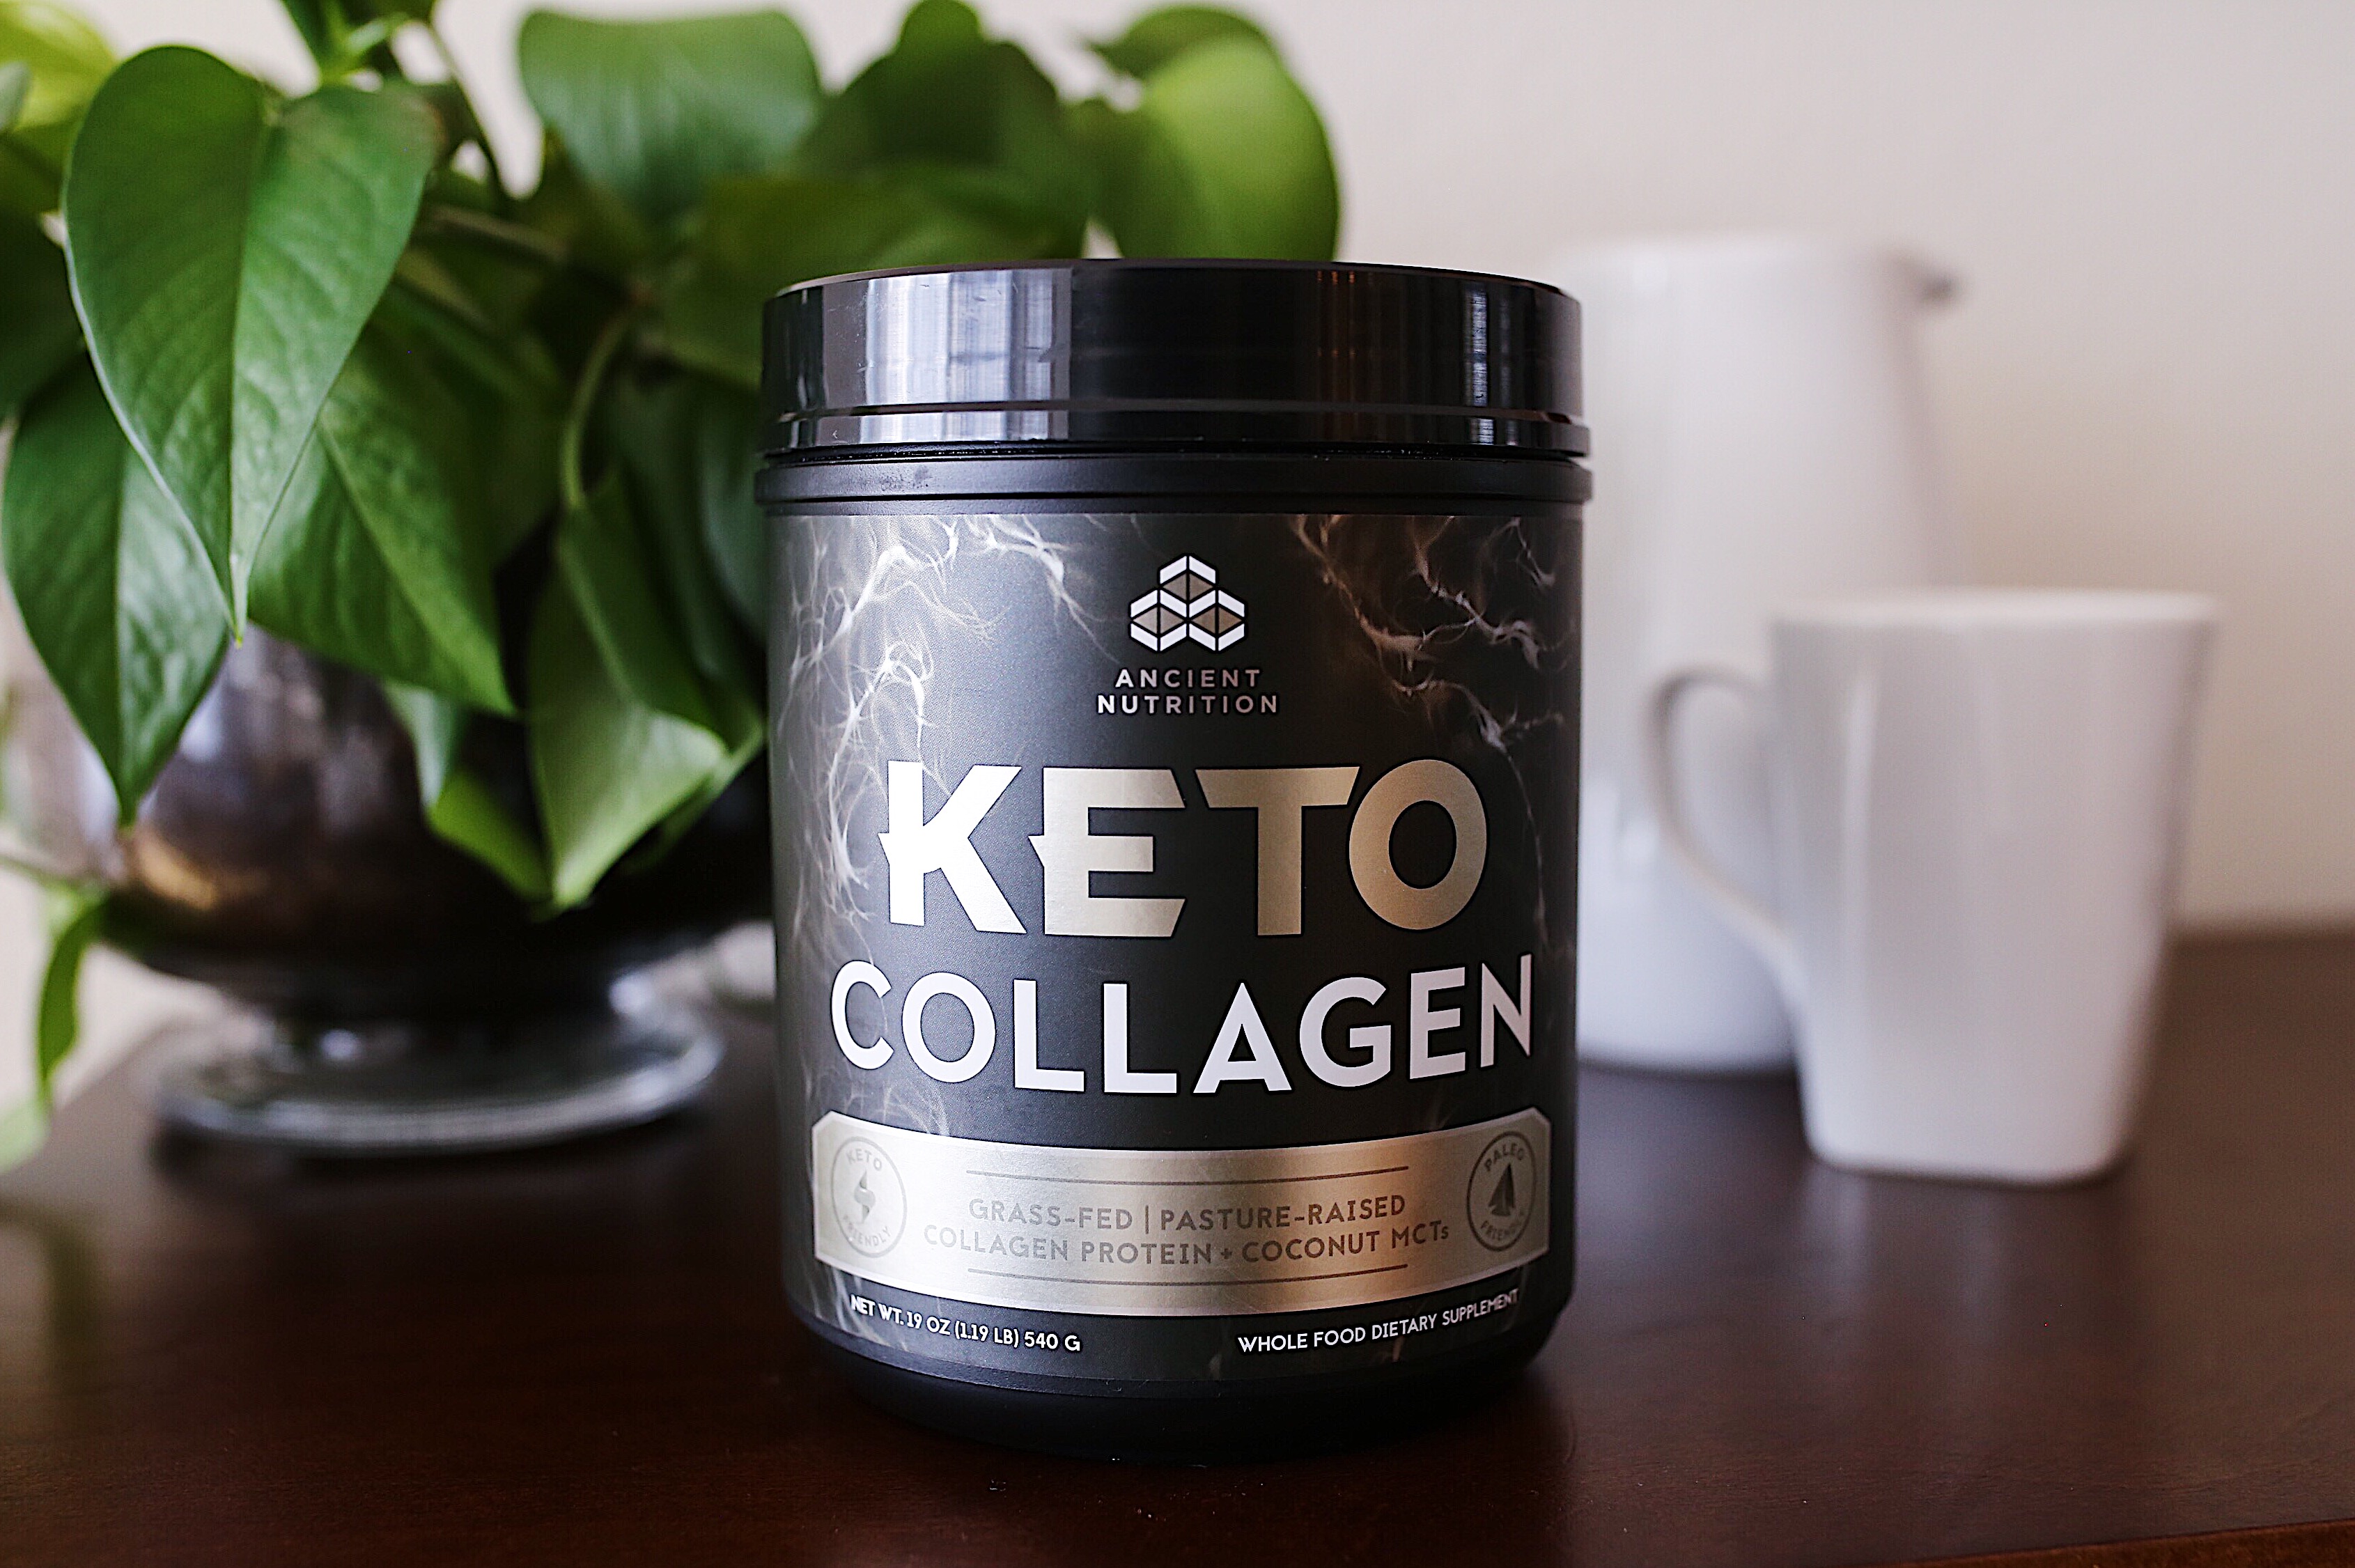 Ancient Nutrition Keto Collagen with Mug